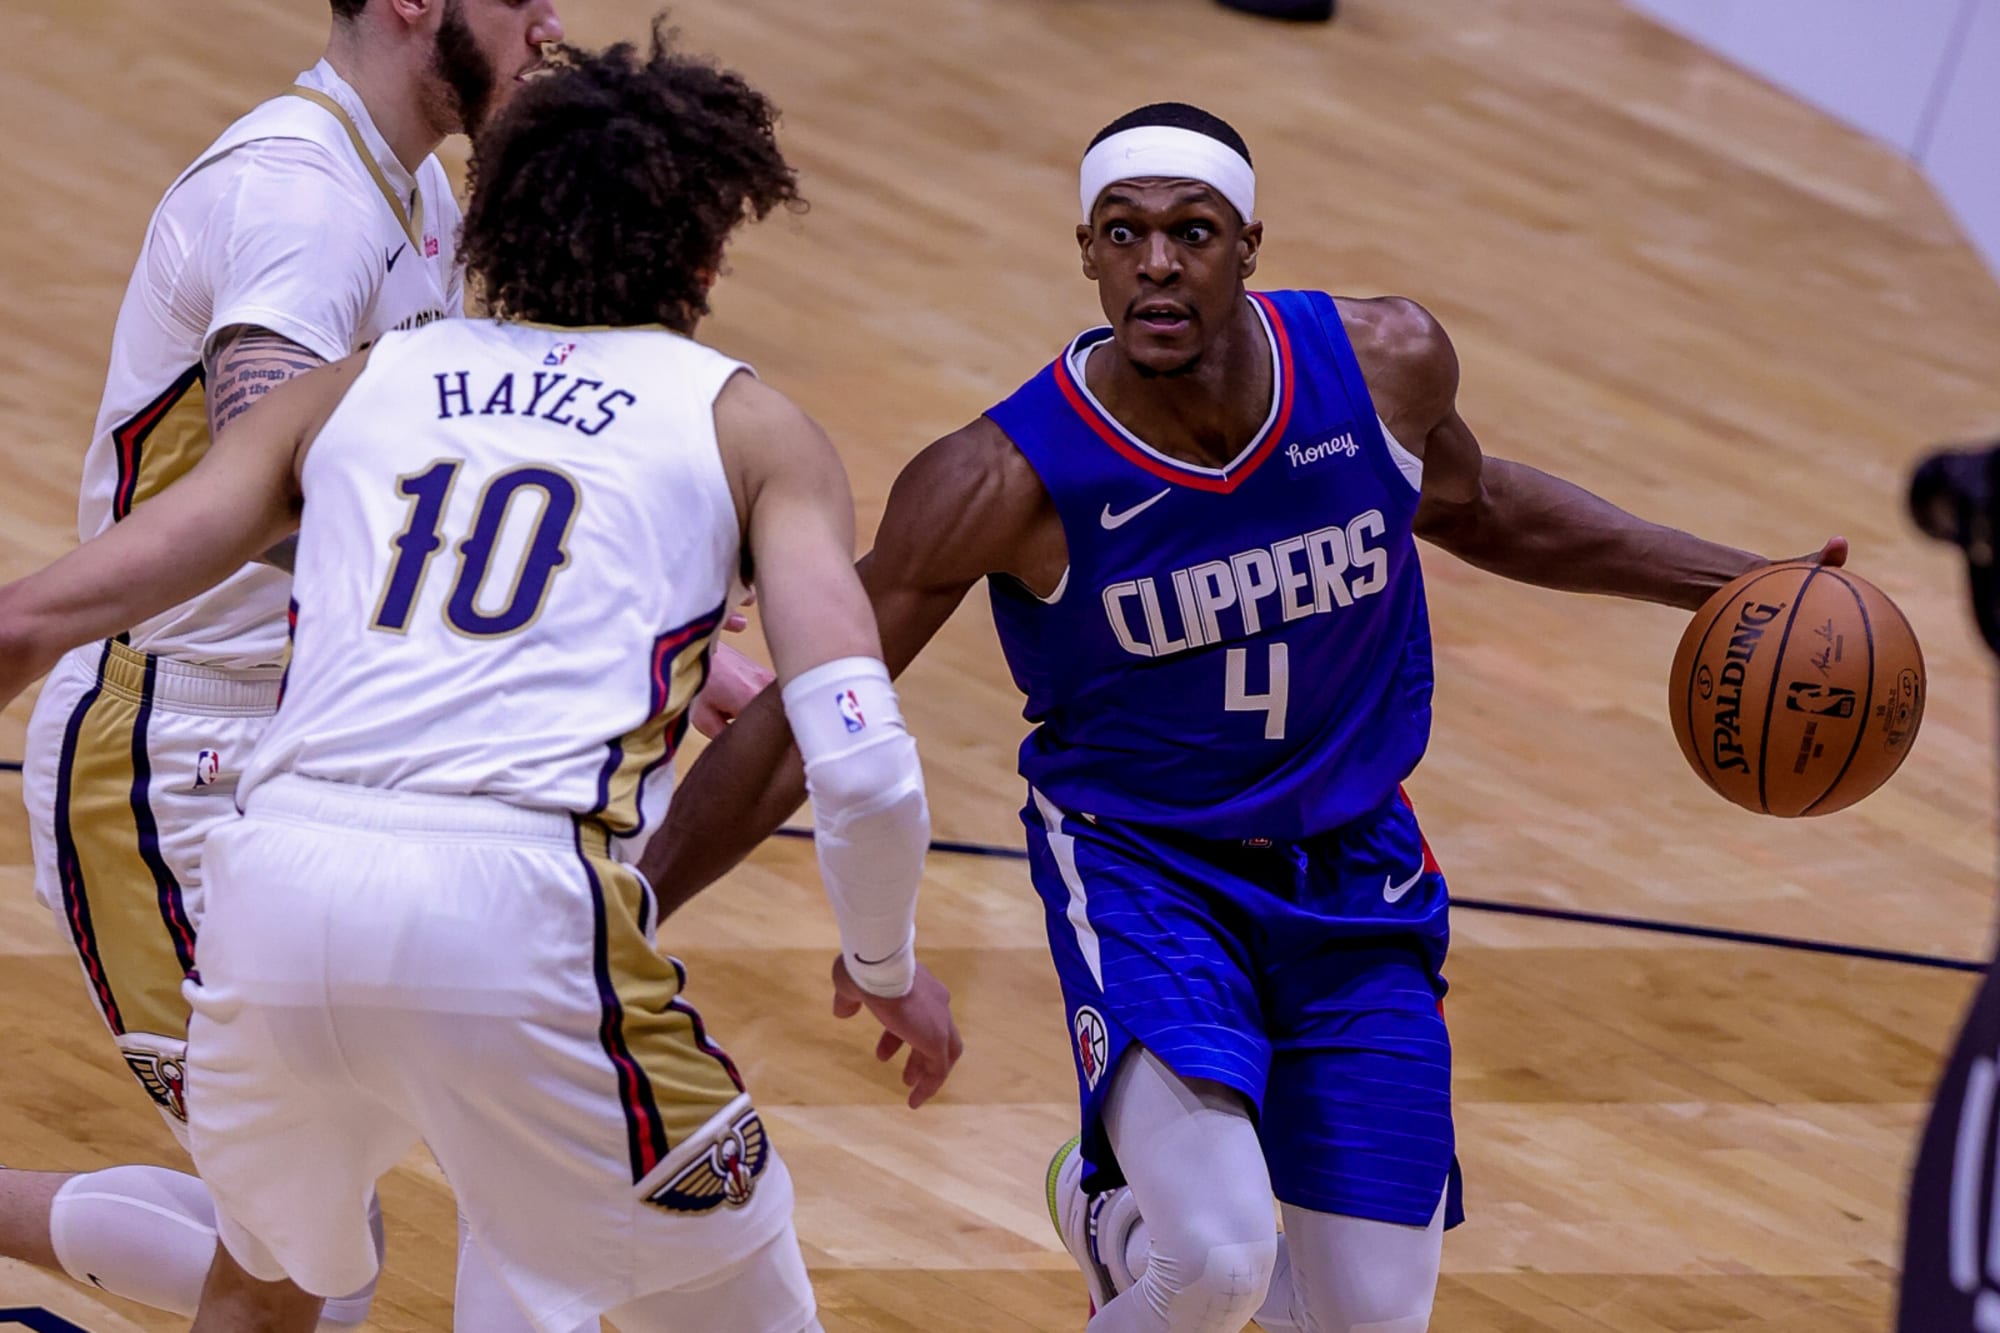 La Clippers Rajon Rondo Makes Nba History Gears Up For Playoffs